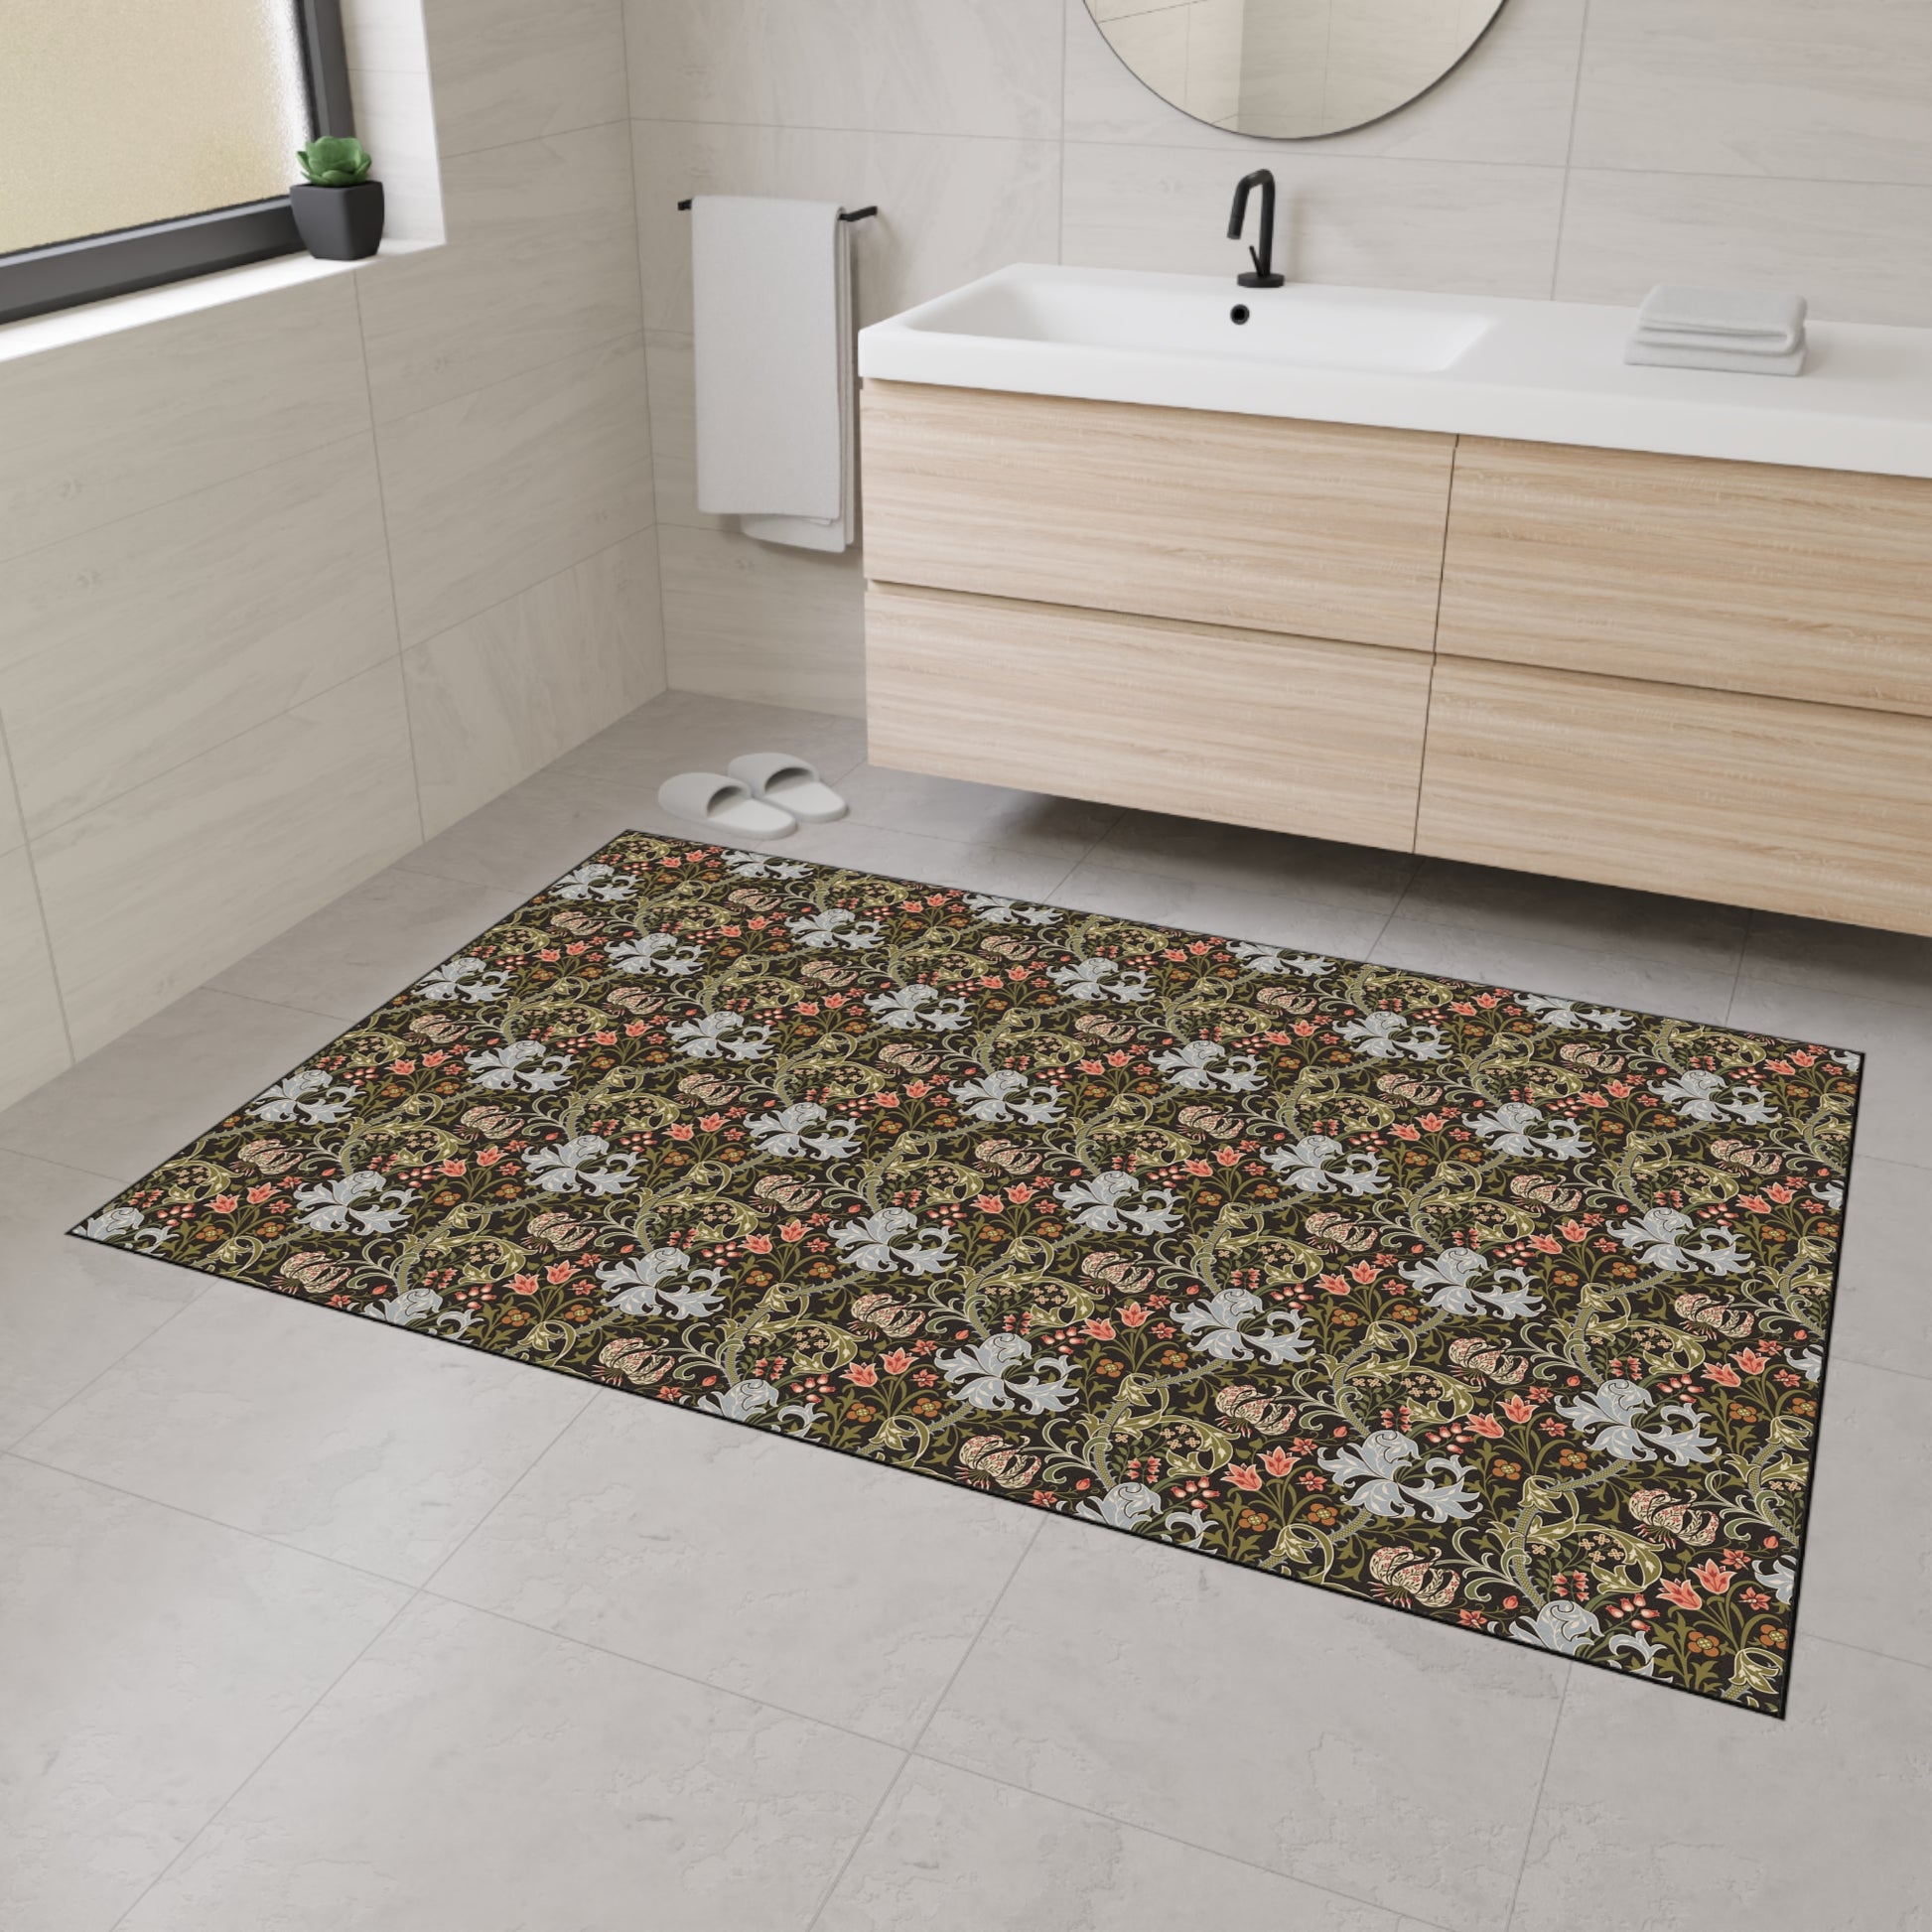 william-morris-co-heavy-duty-floor-mat-golden-lily-collection-midnight-8